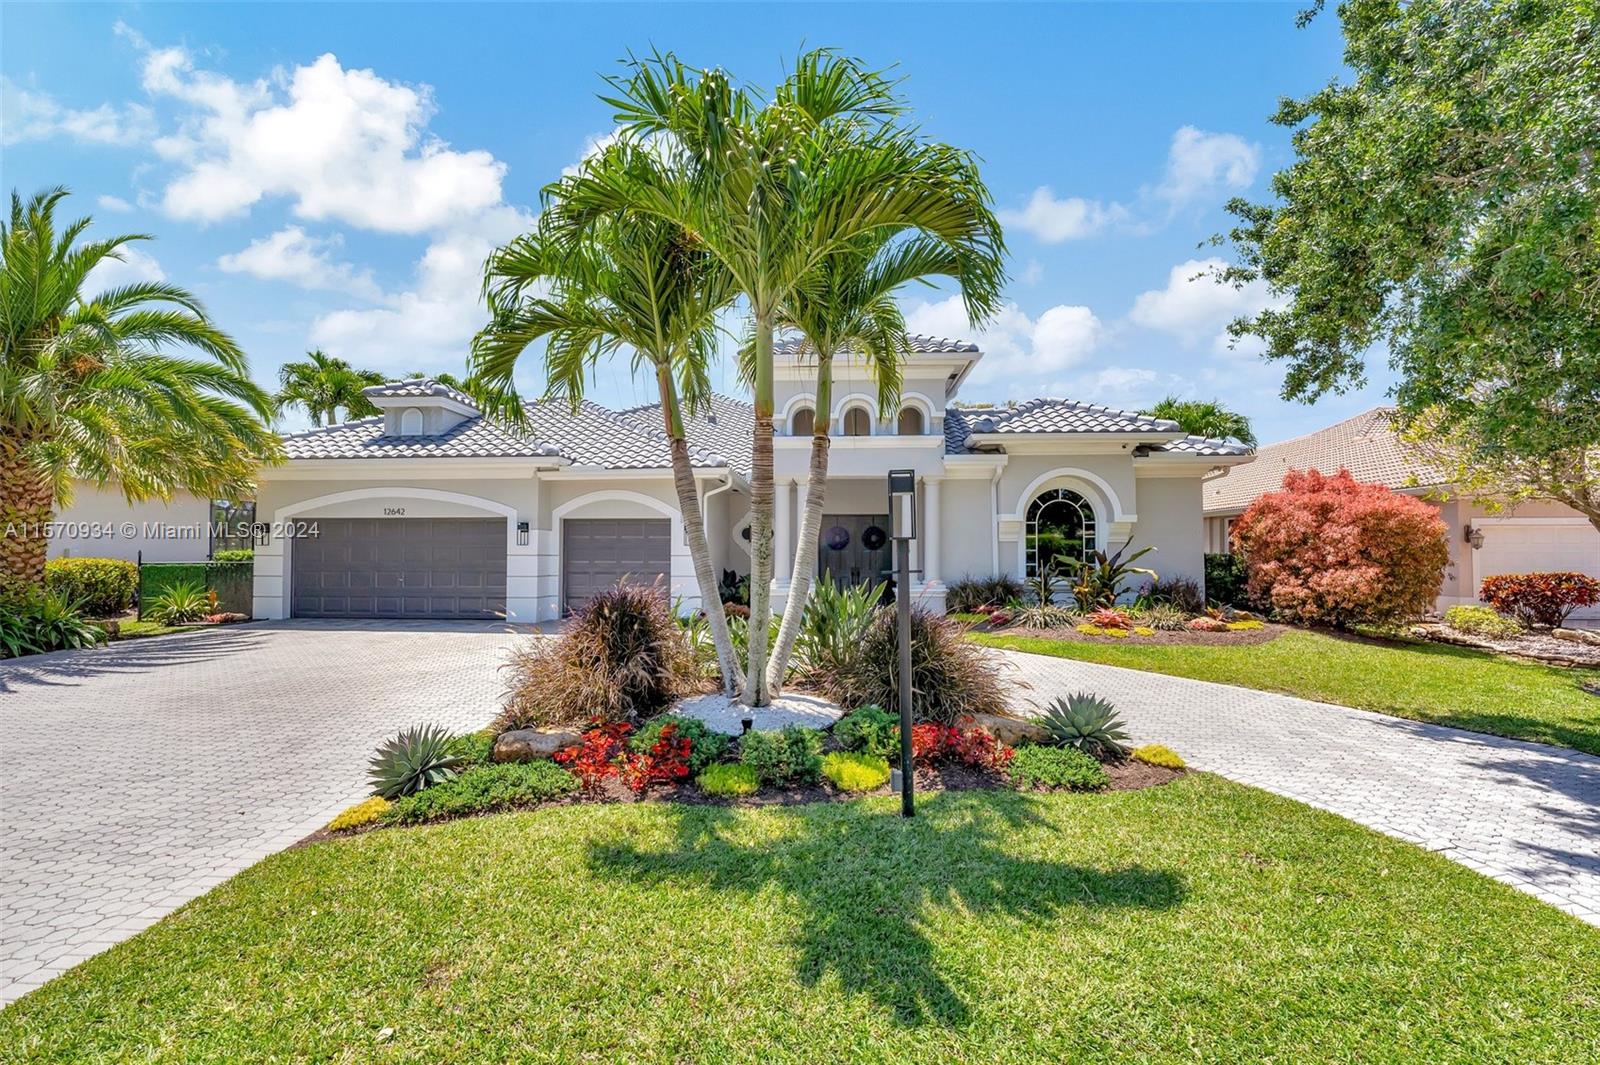 12642 NW 68th Dr, Parkland, Florida 33076, 5 Bedrooms Bedrooms, ,4 BathroomsBathrooms,Residential,For Sale,12642 NW 68th Dr,A11570934